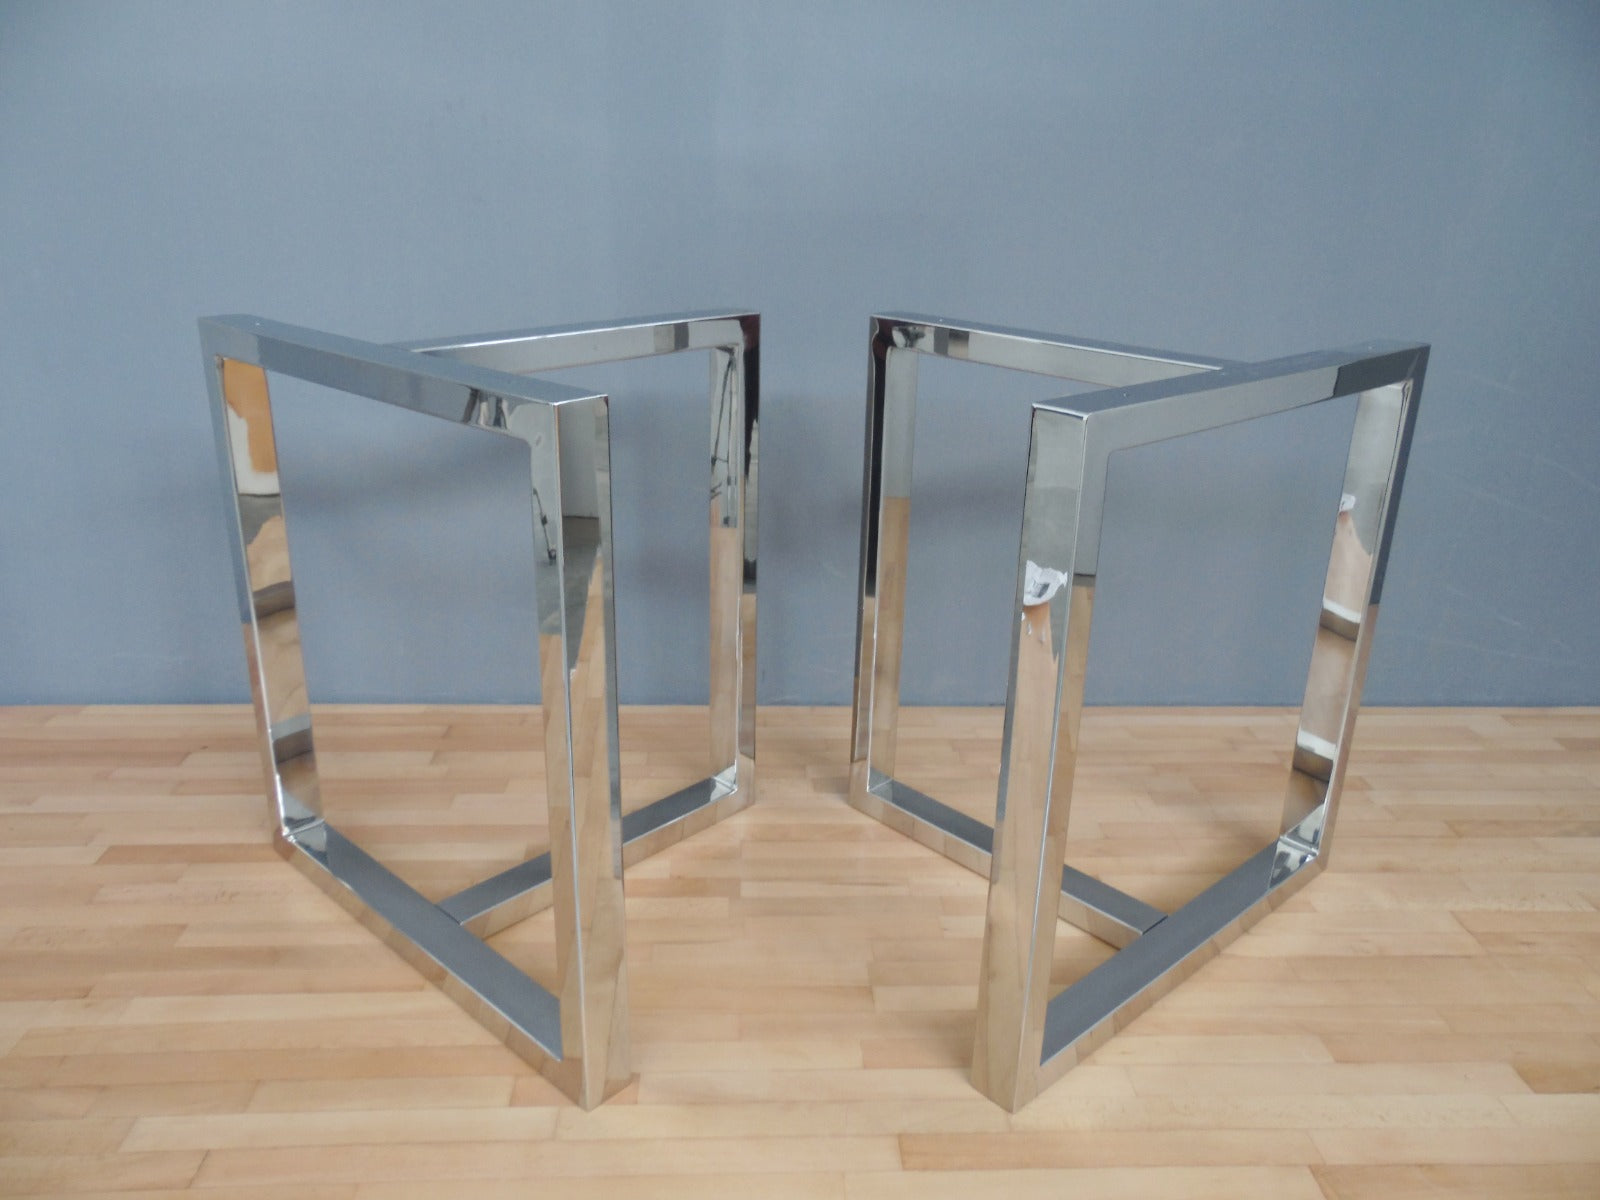 28"X 28"X16" Trestle Stainless Steel Dining Table Legs , height 26" - 32" Set(2)